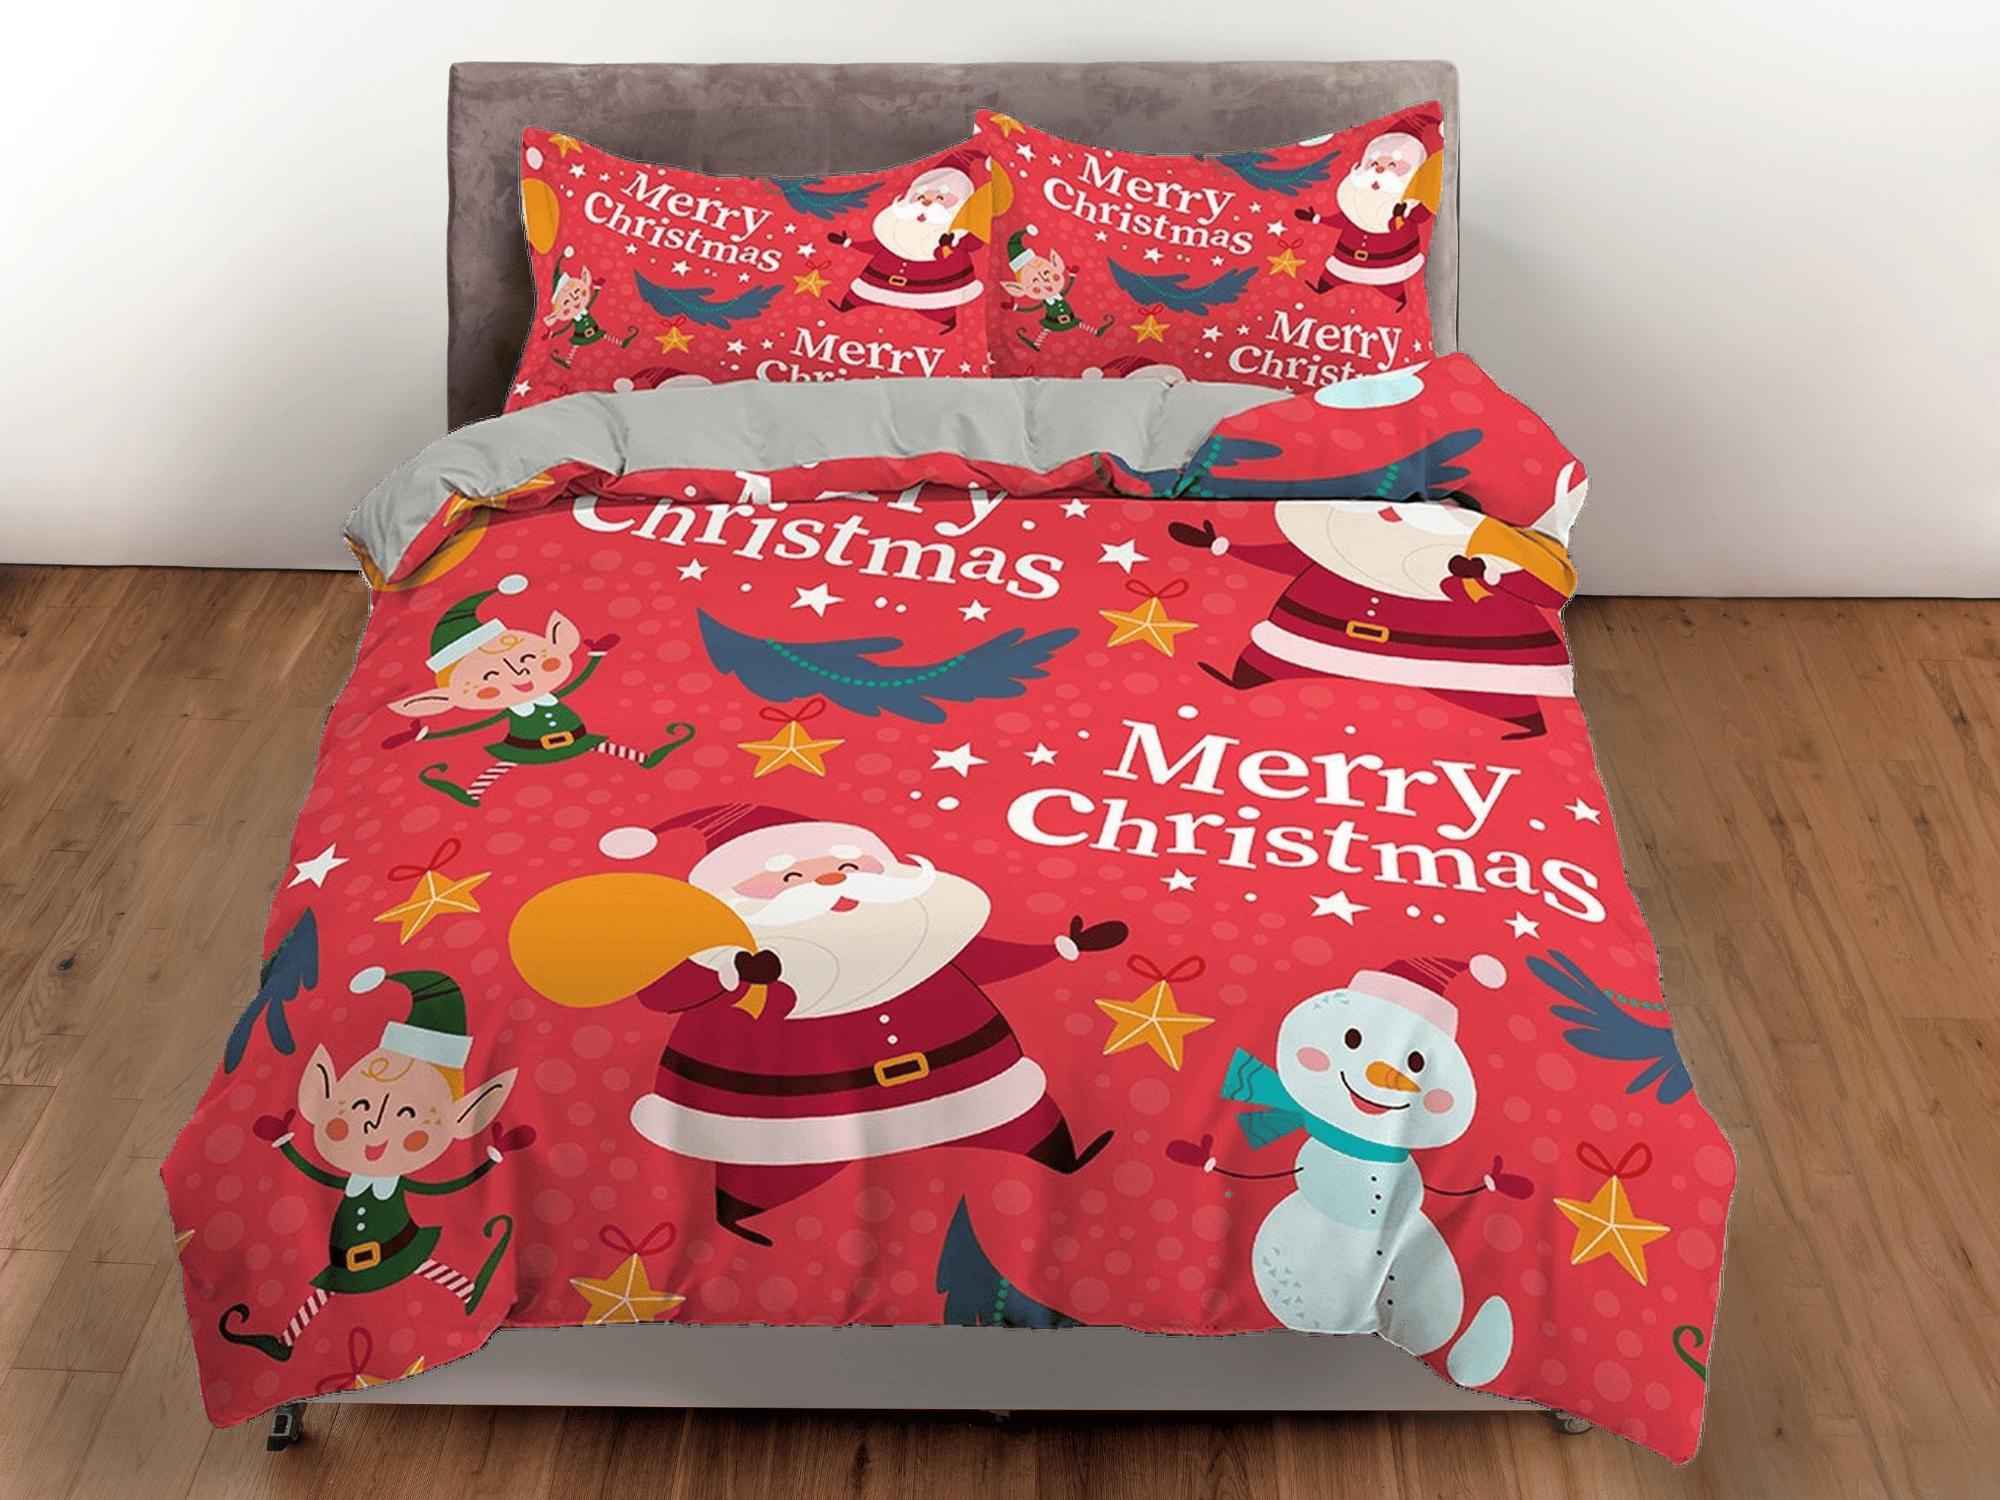 daintyduvet Santa claus and snowman bright red duvet cover set christmas full size bedding & pillowcase, college bedding, toddler bedding, holiday gift